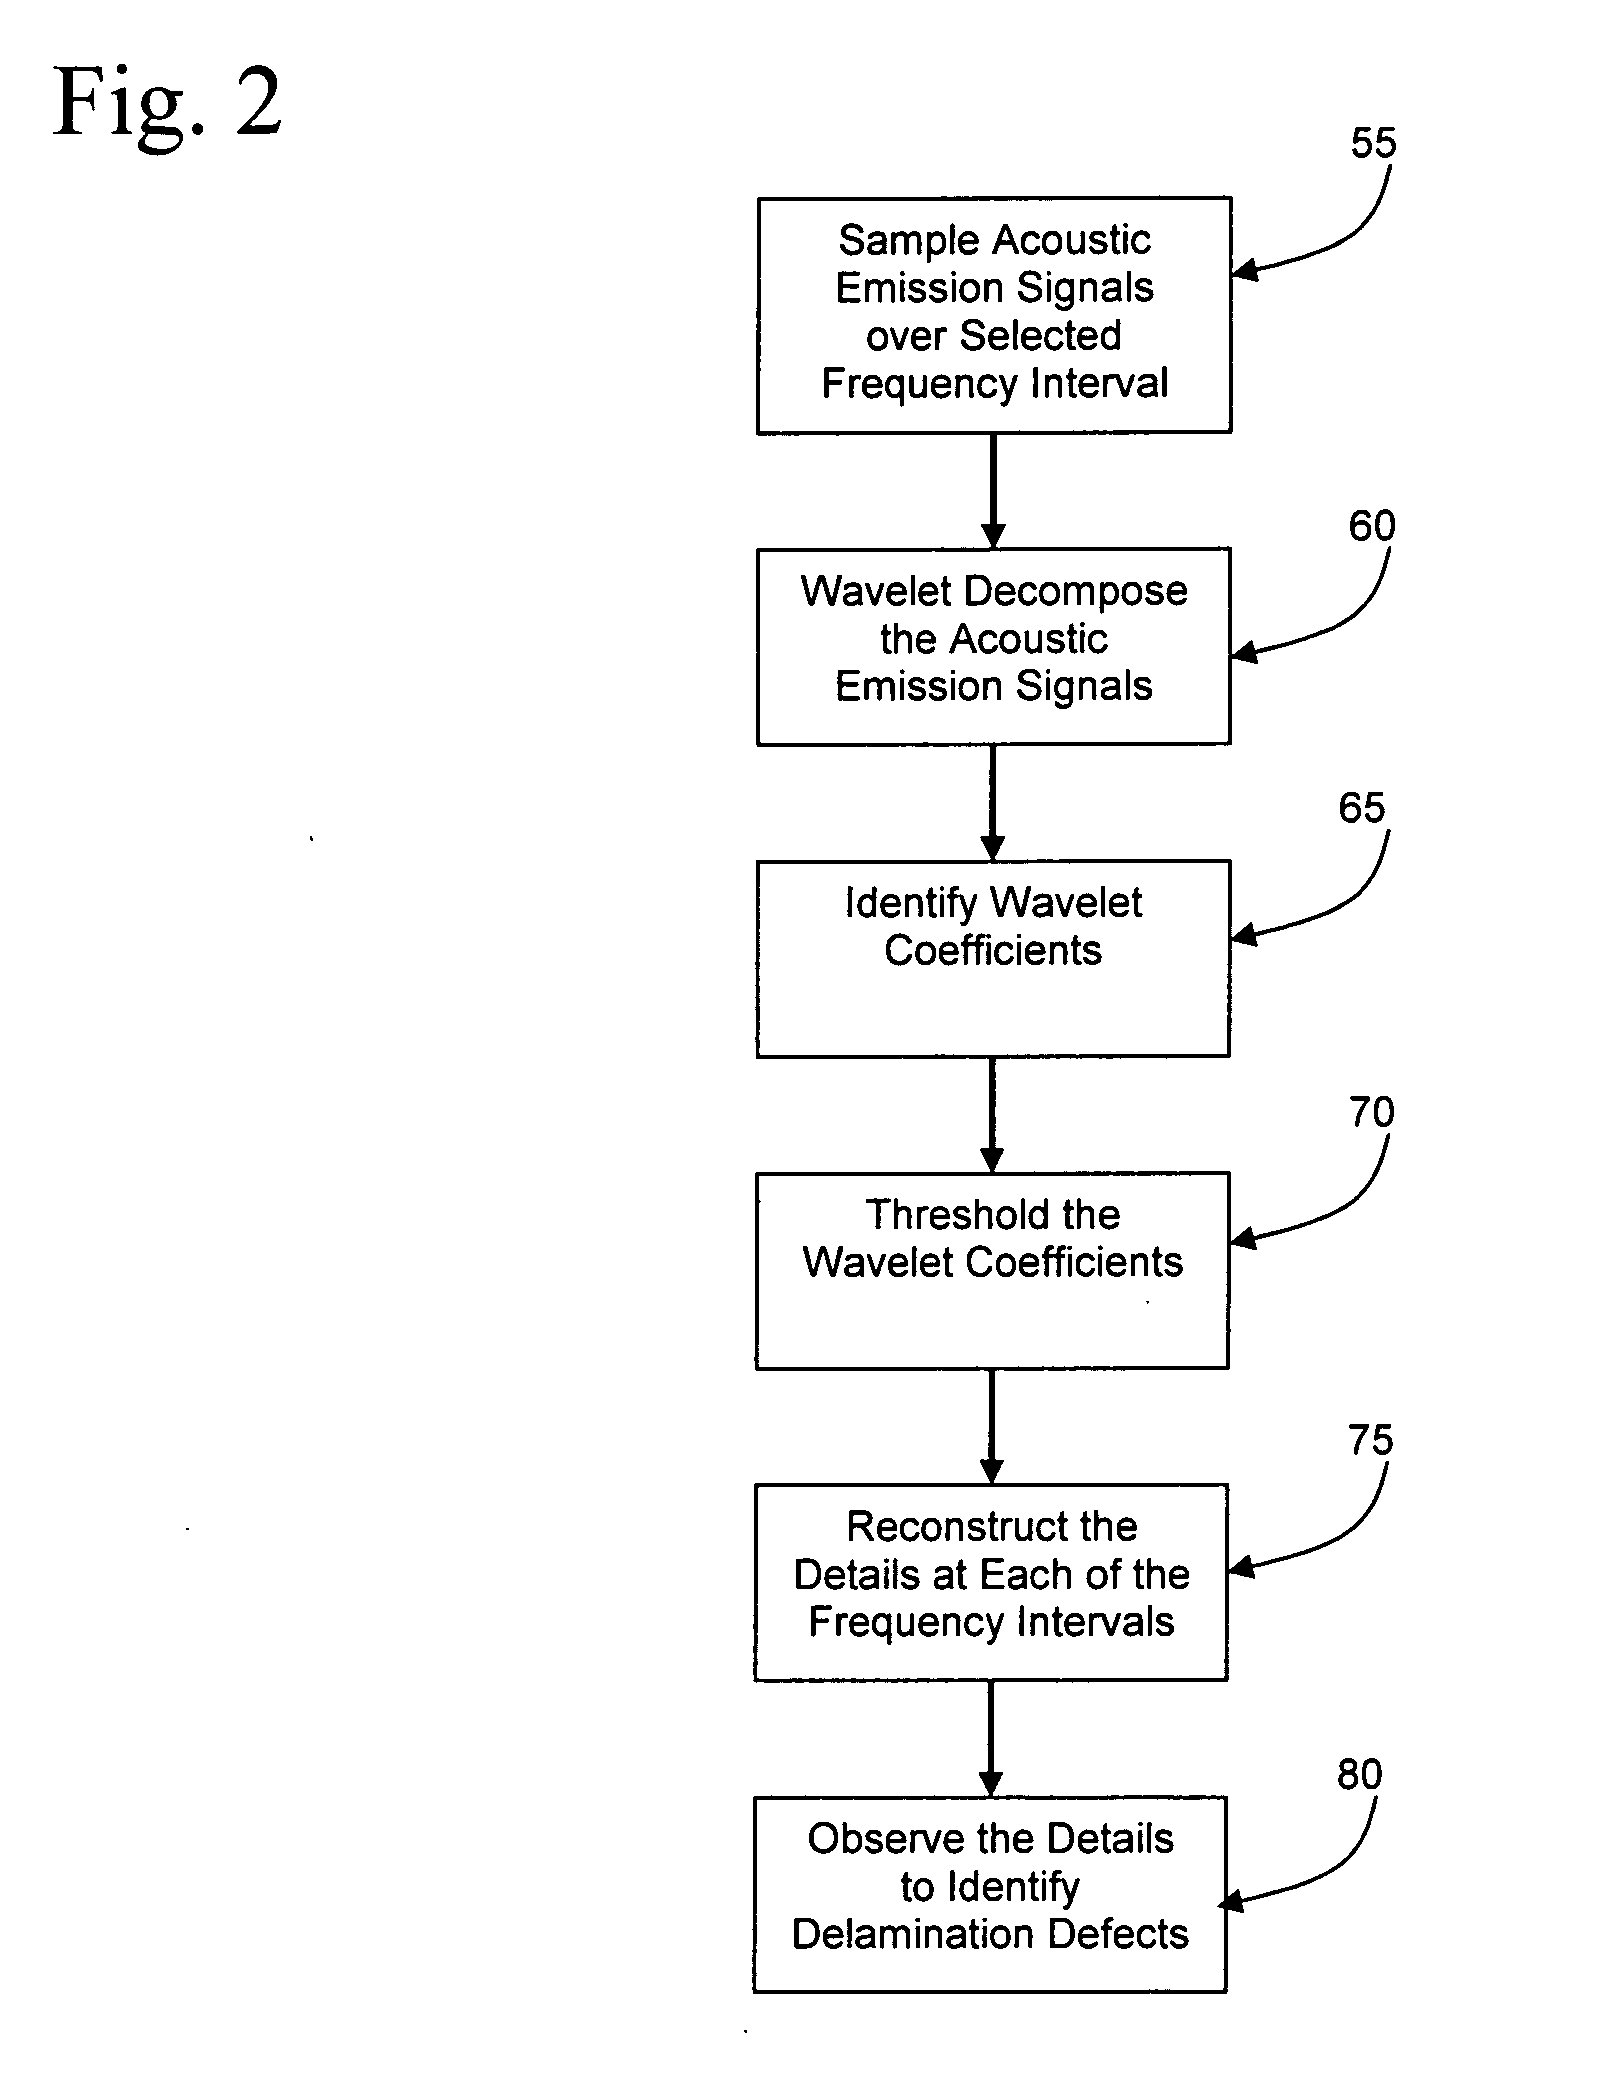 System and Method for the Identification of Chemical Mechanical Planarization Defects